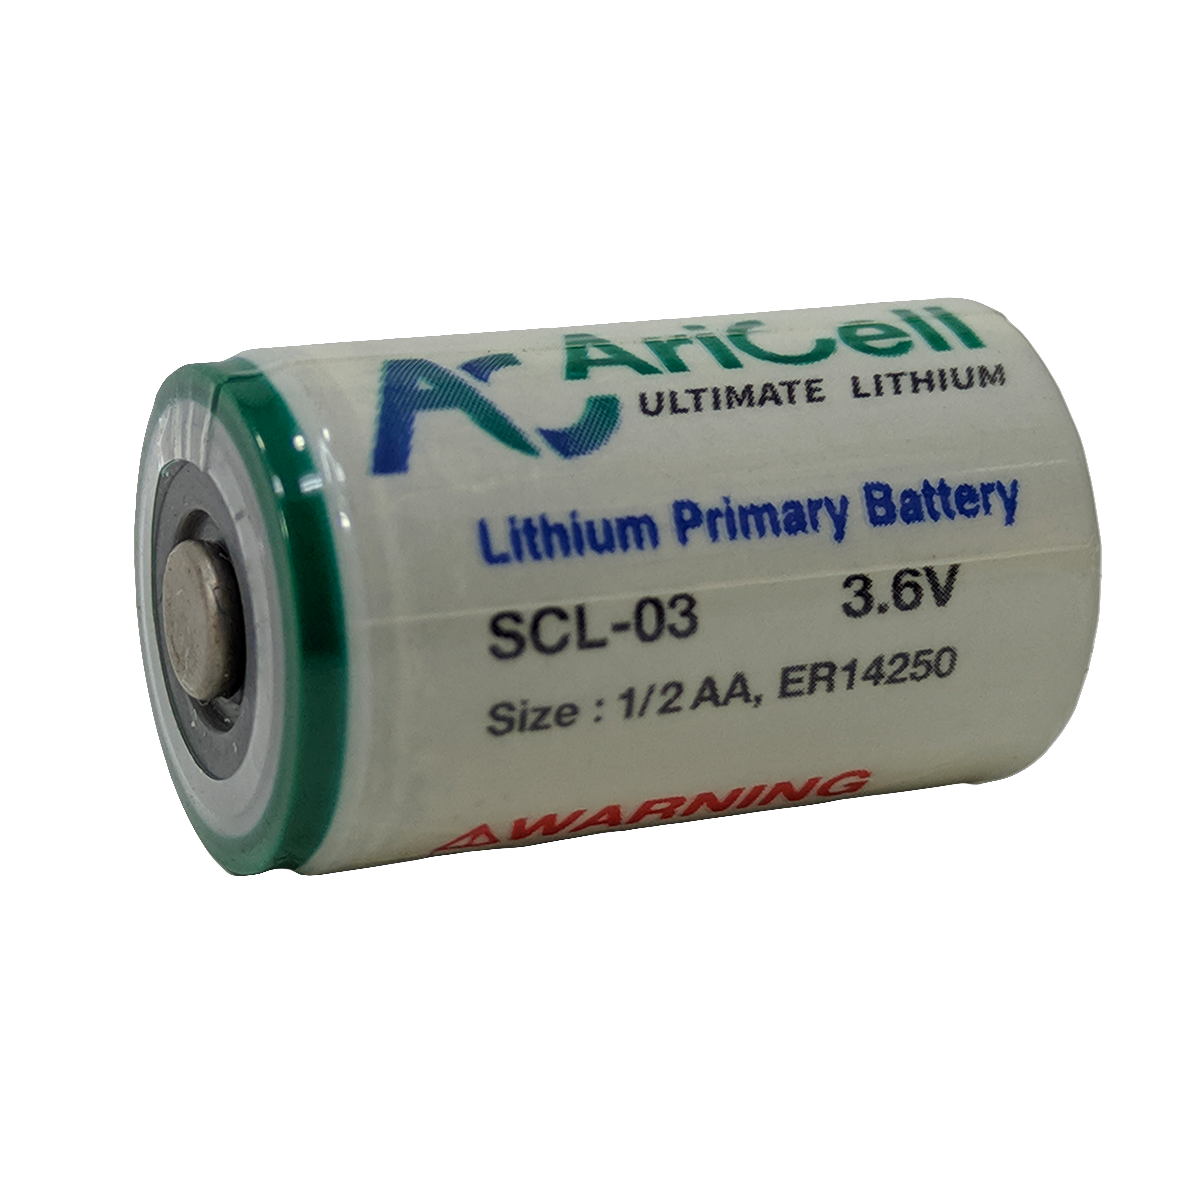 AriCell 1/2 AA Battery (SCL-03) (Lithium Thionyl Chloride)